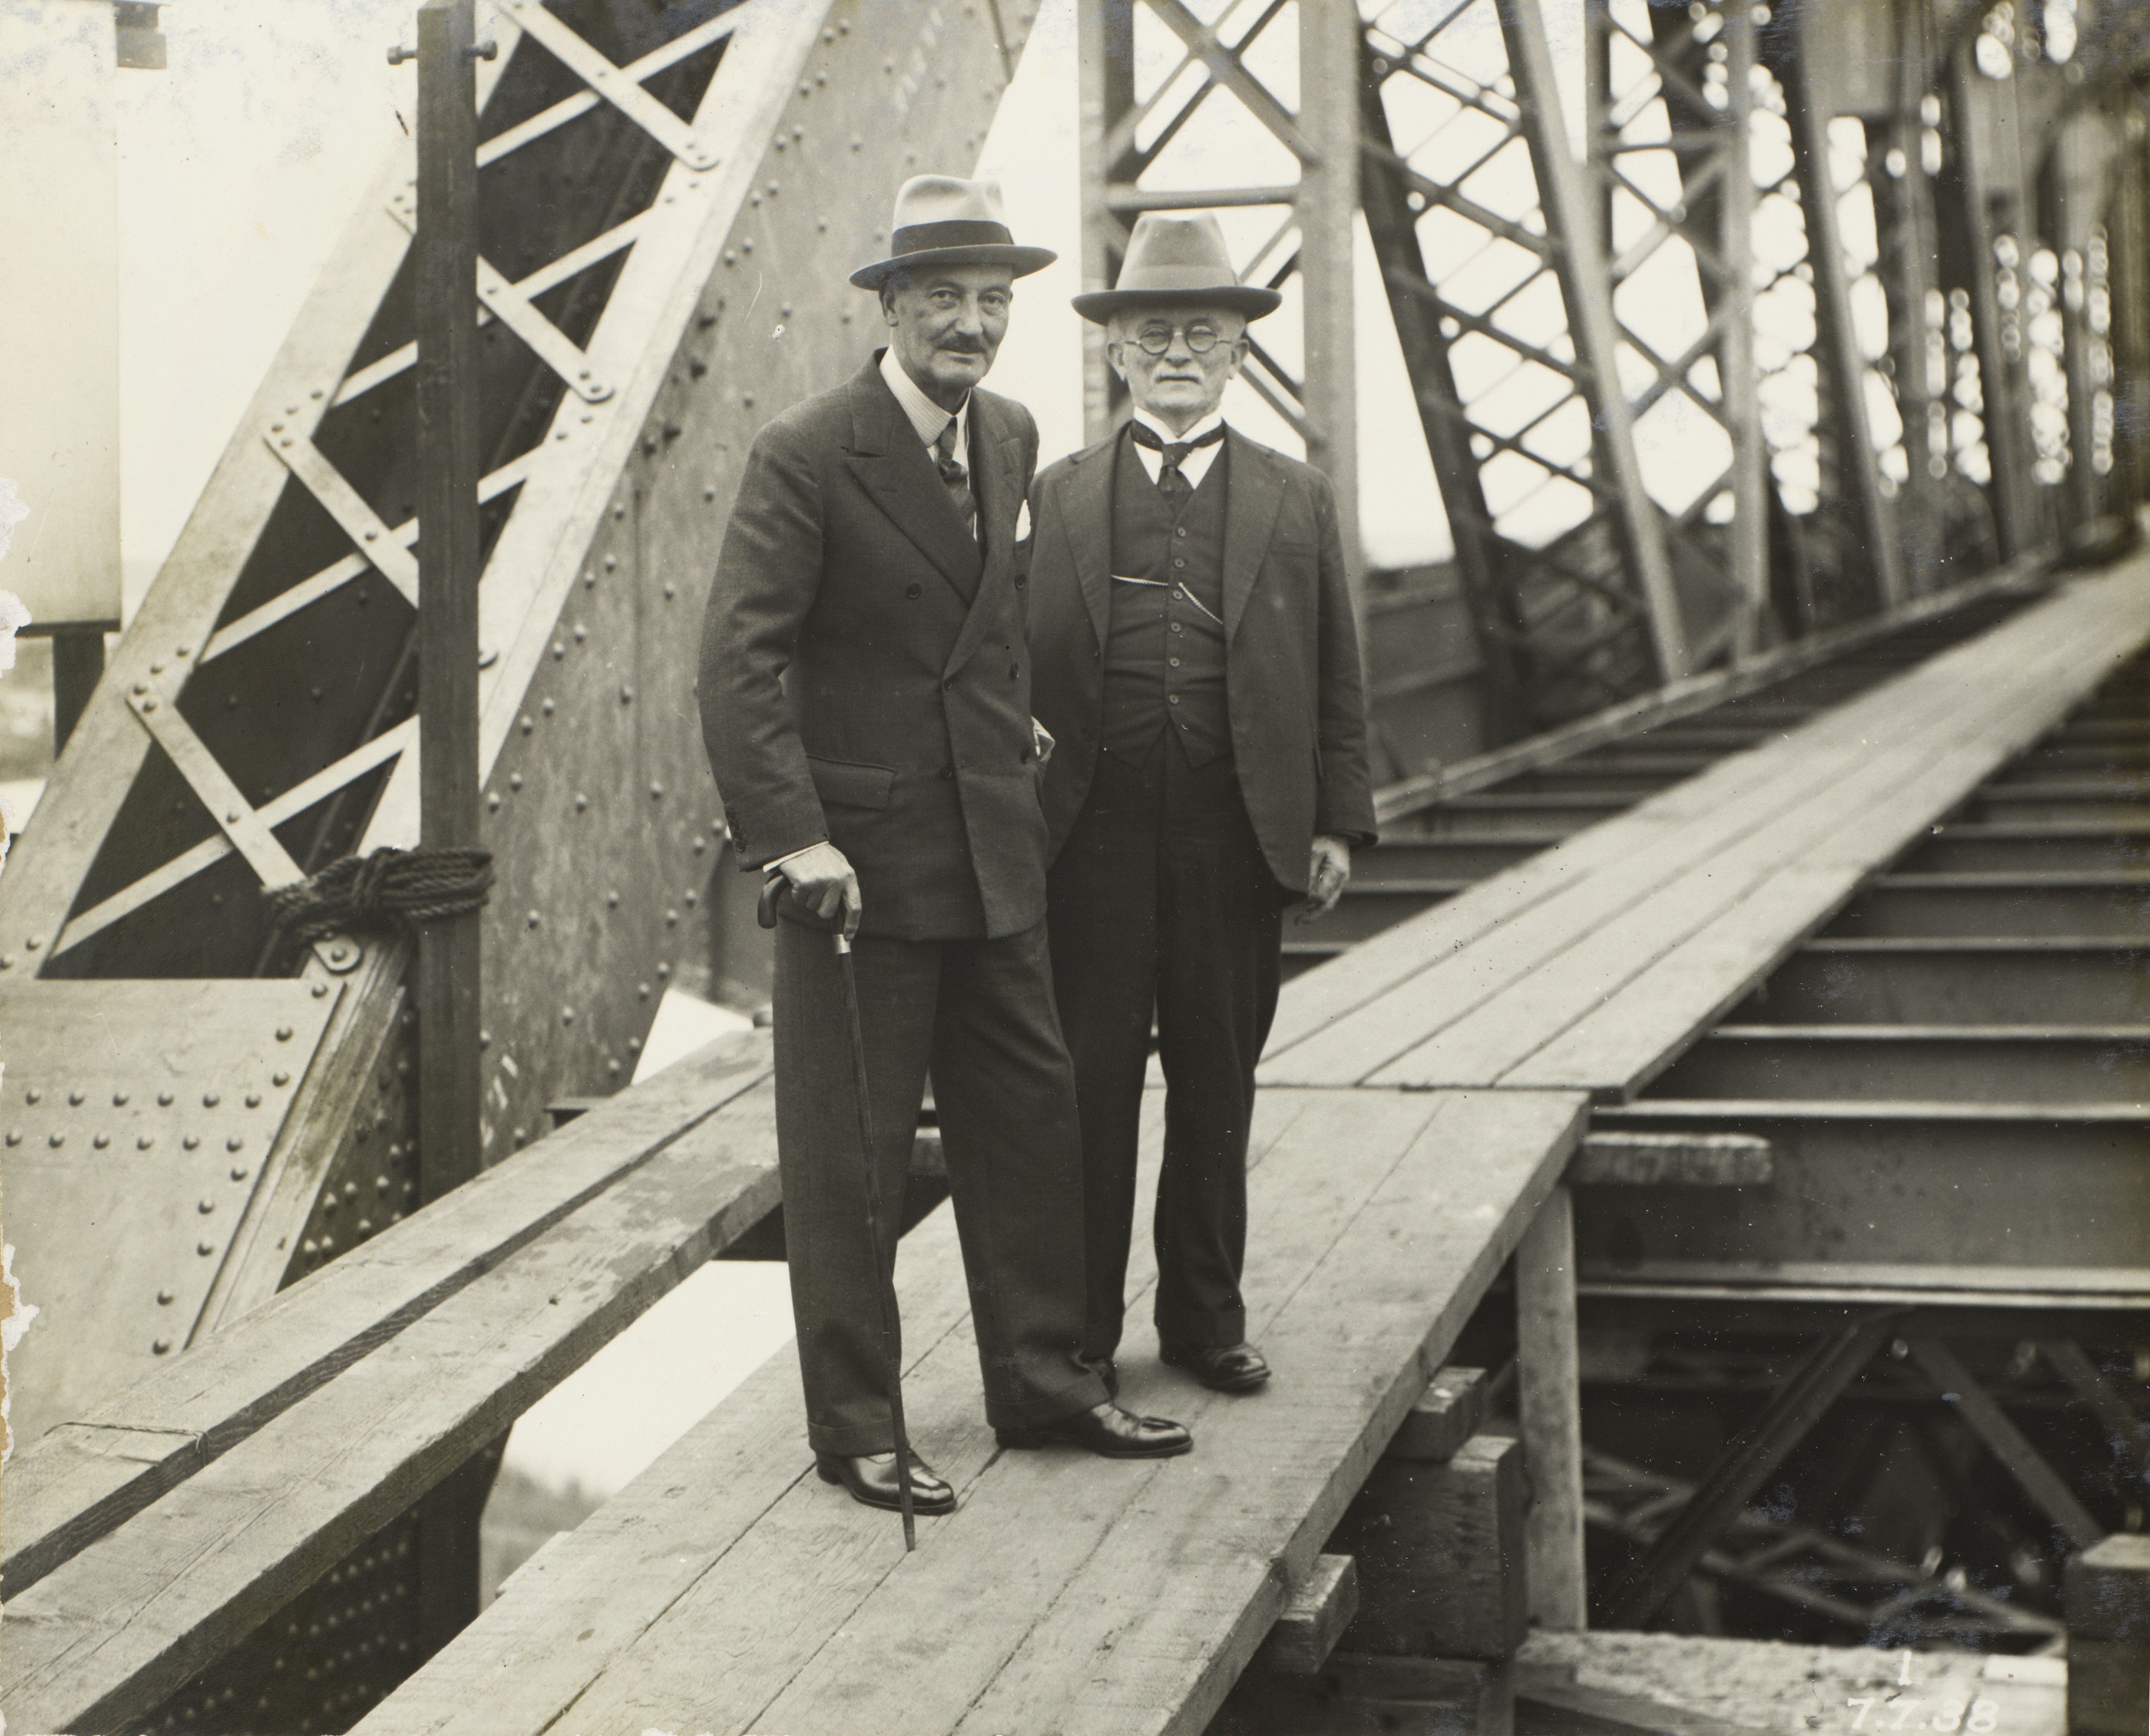 Two men in suits with canes and top hats stand on a makeshift wooden platform spanning the Story Bridge while under construction in 1938